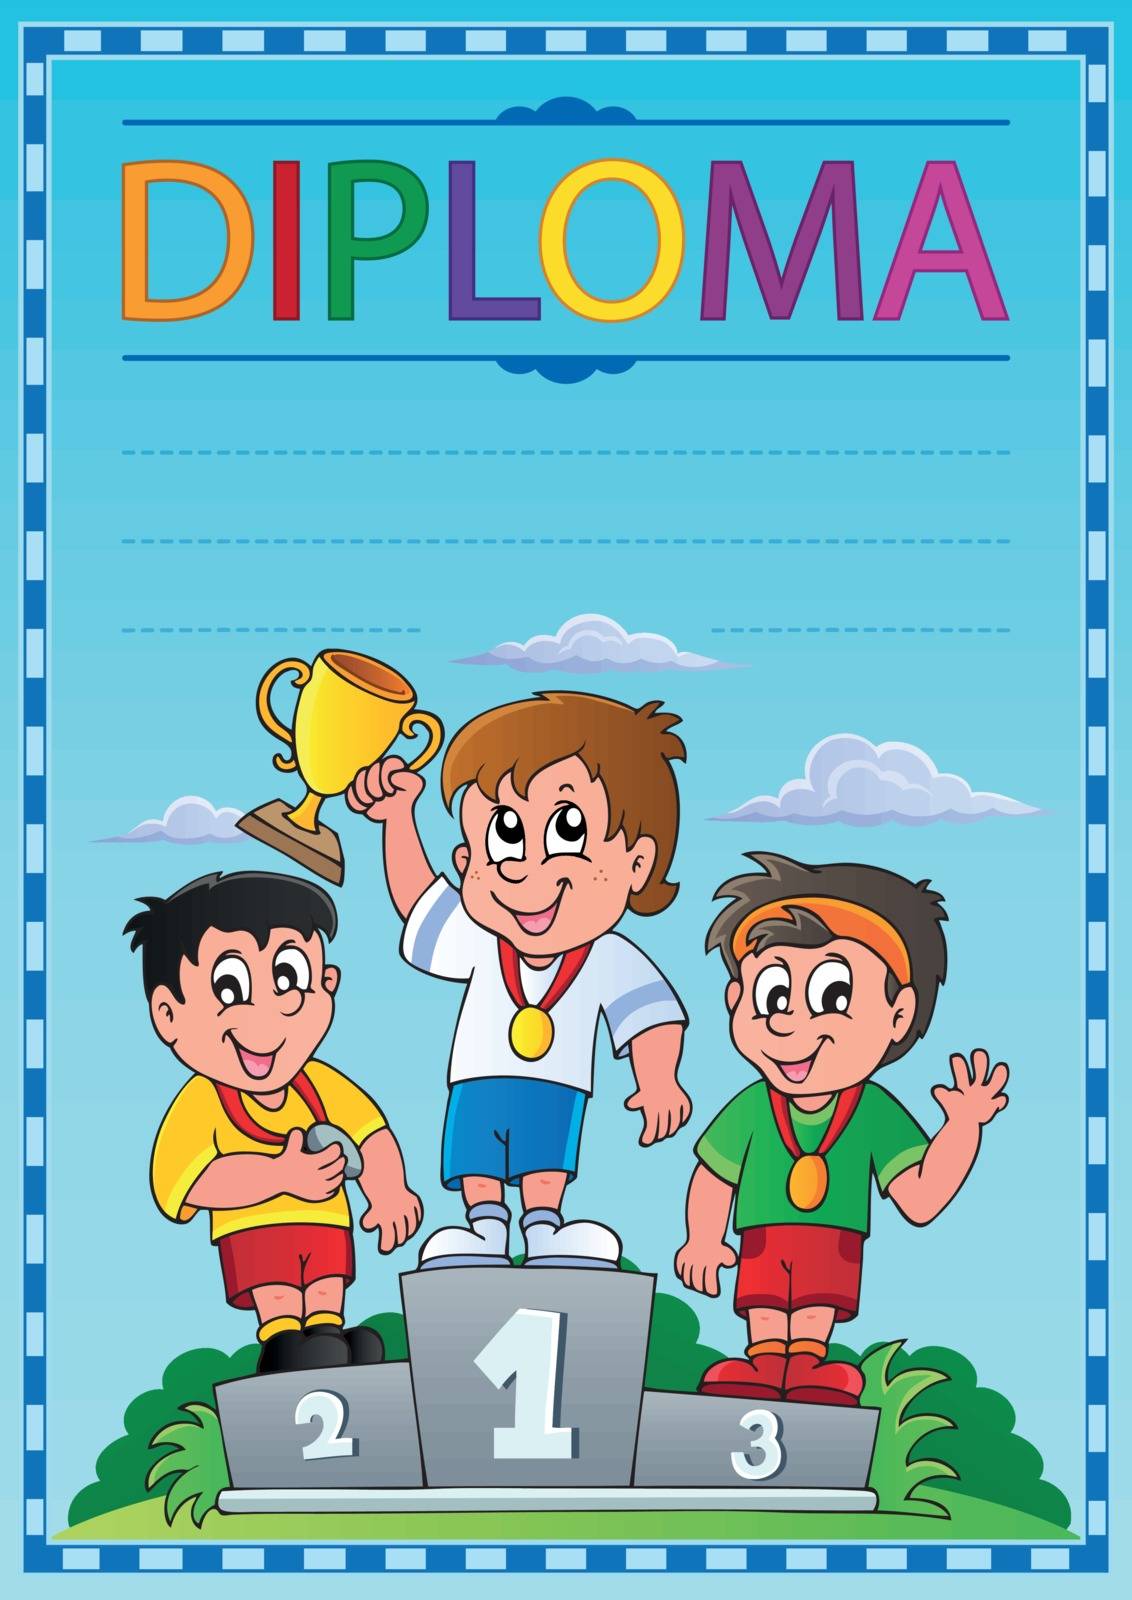 Diploma topic image 3 by clairev